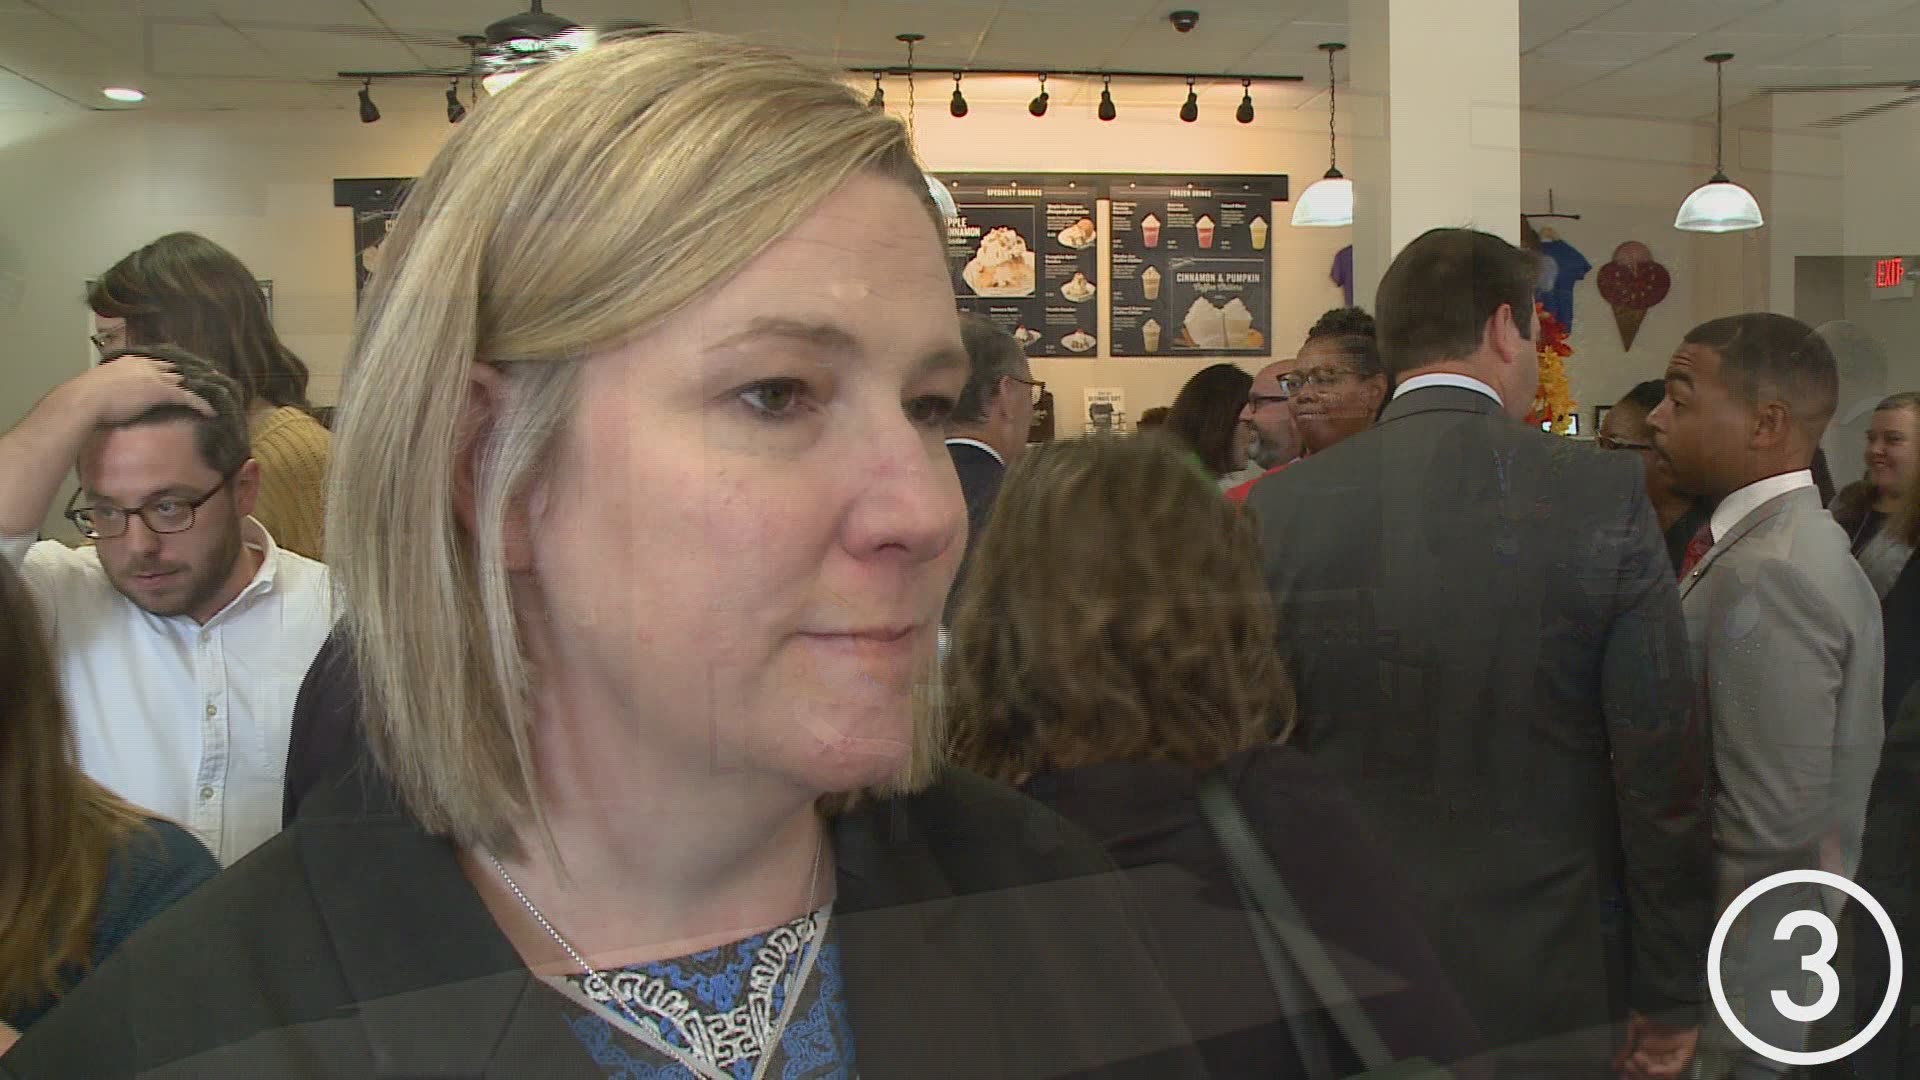 Dayton Mayor Nan Whaley discussed the Democrats' push for gun control ahead of the Democratic Debate at Otterbein University.